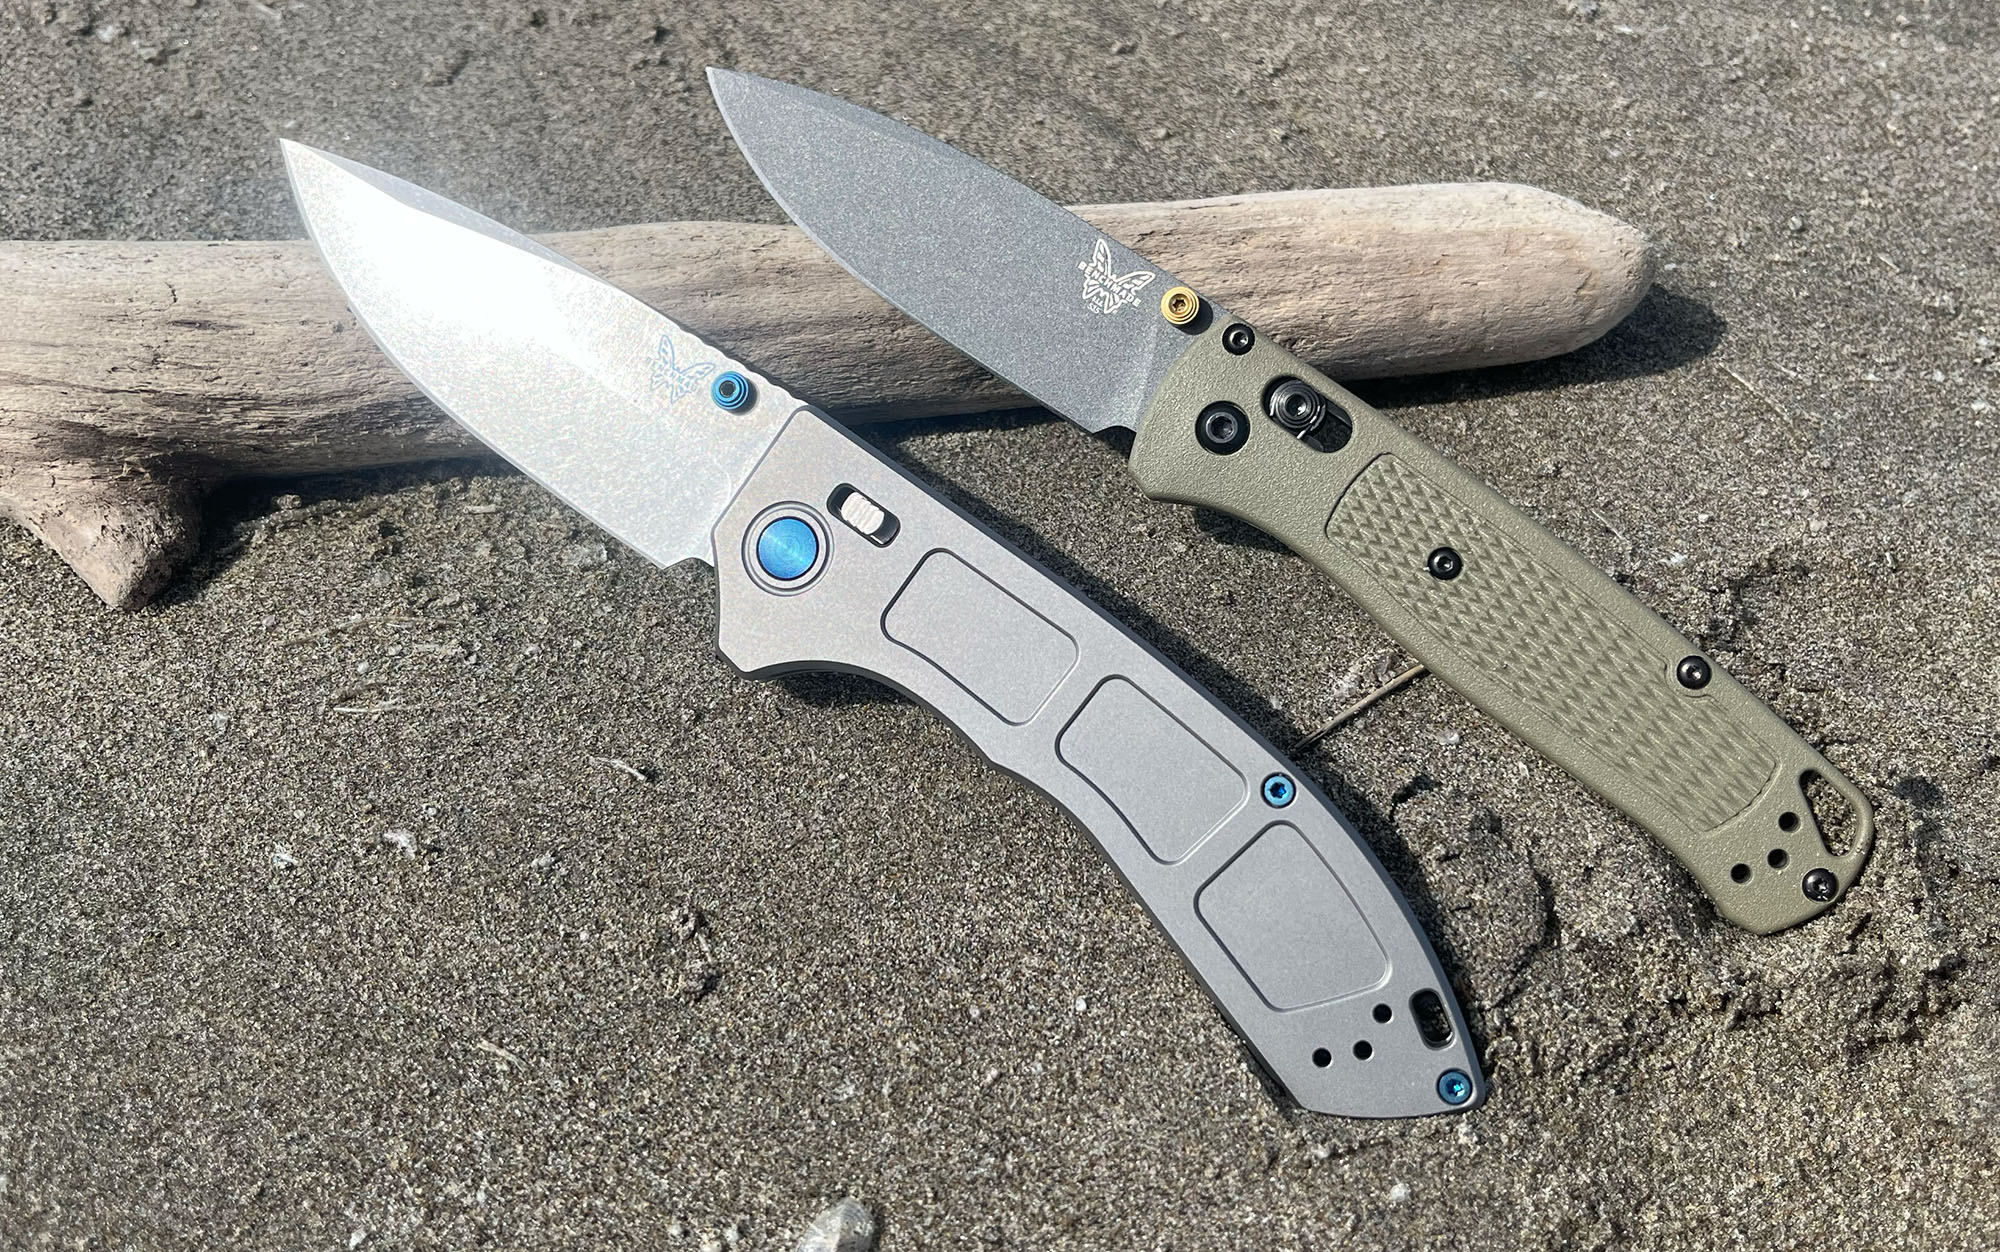 The Benchmade Bugout (right) sits next to the Benchmade Narrows, the slimmest full-size frame Benchmade makes.